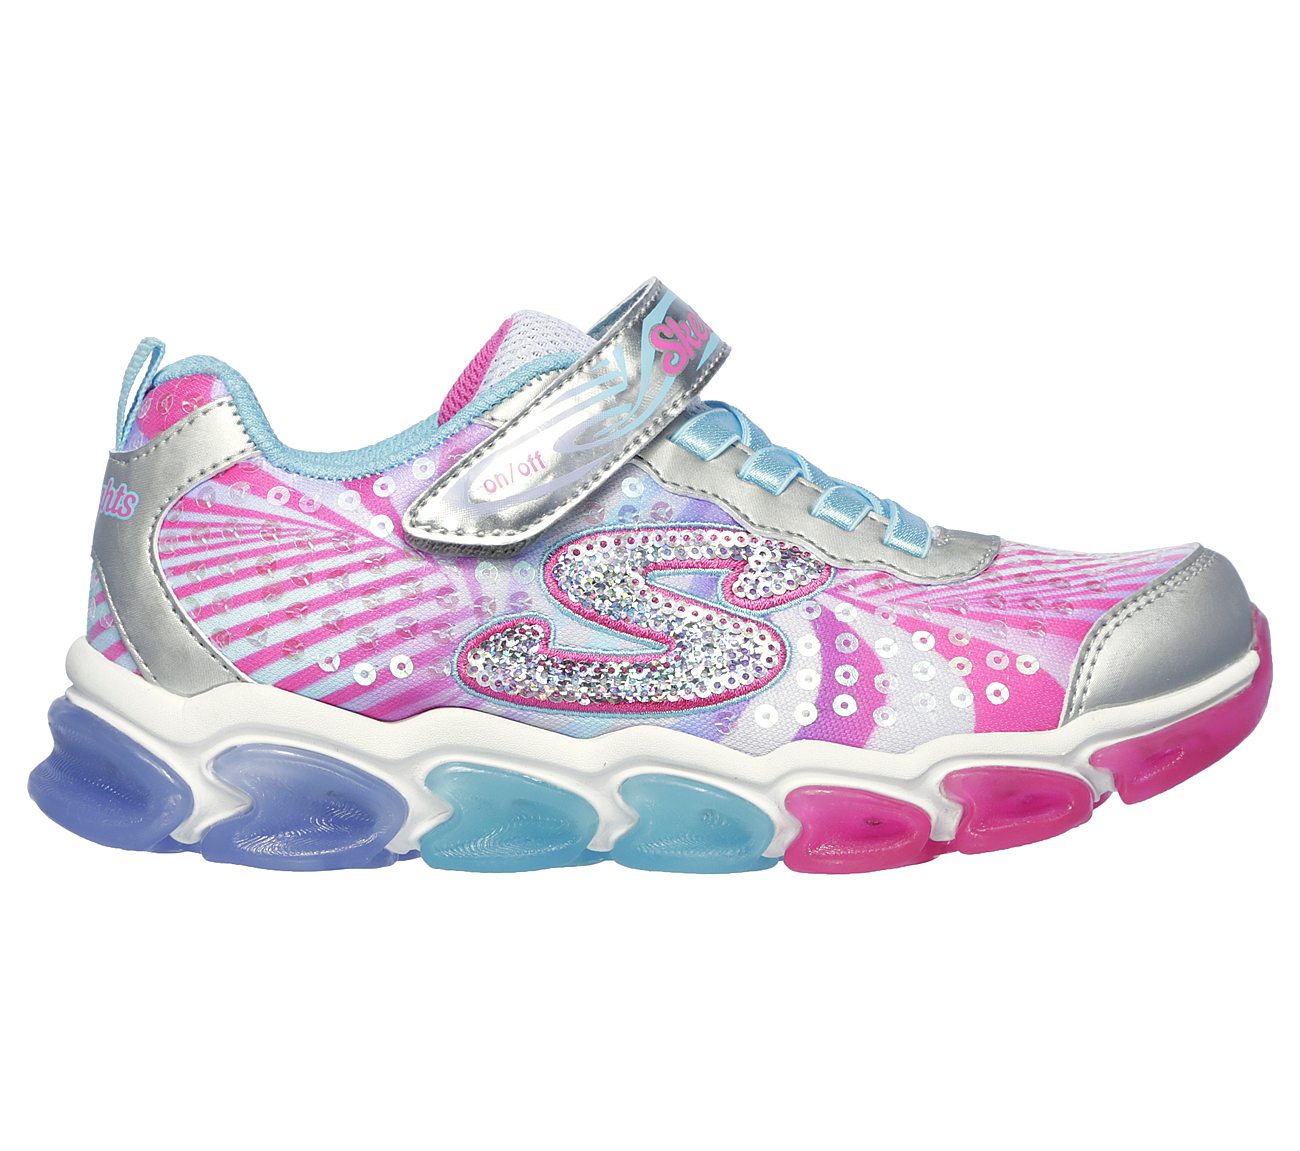 Jelly Beams SKECHERS S-Lights Shoes